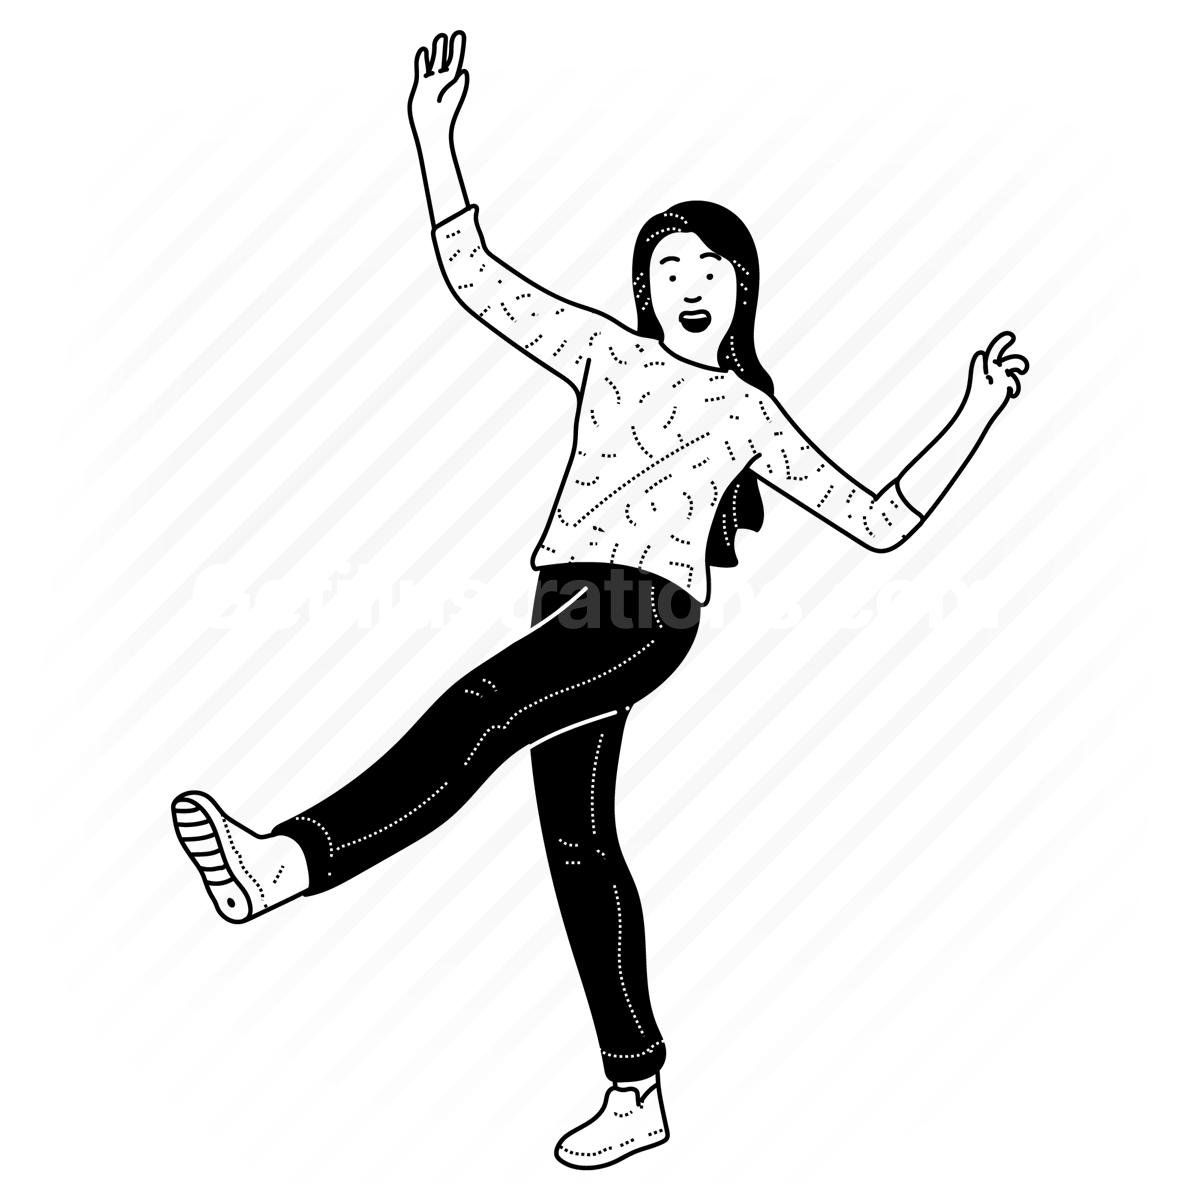 teenager, teenagers, people, person, girl, female, pose, dance, silly, gesture